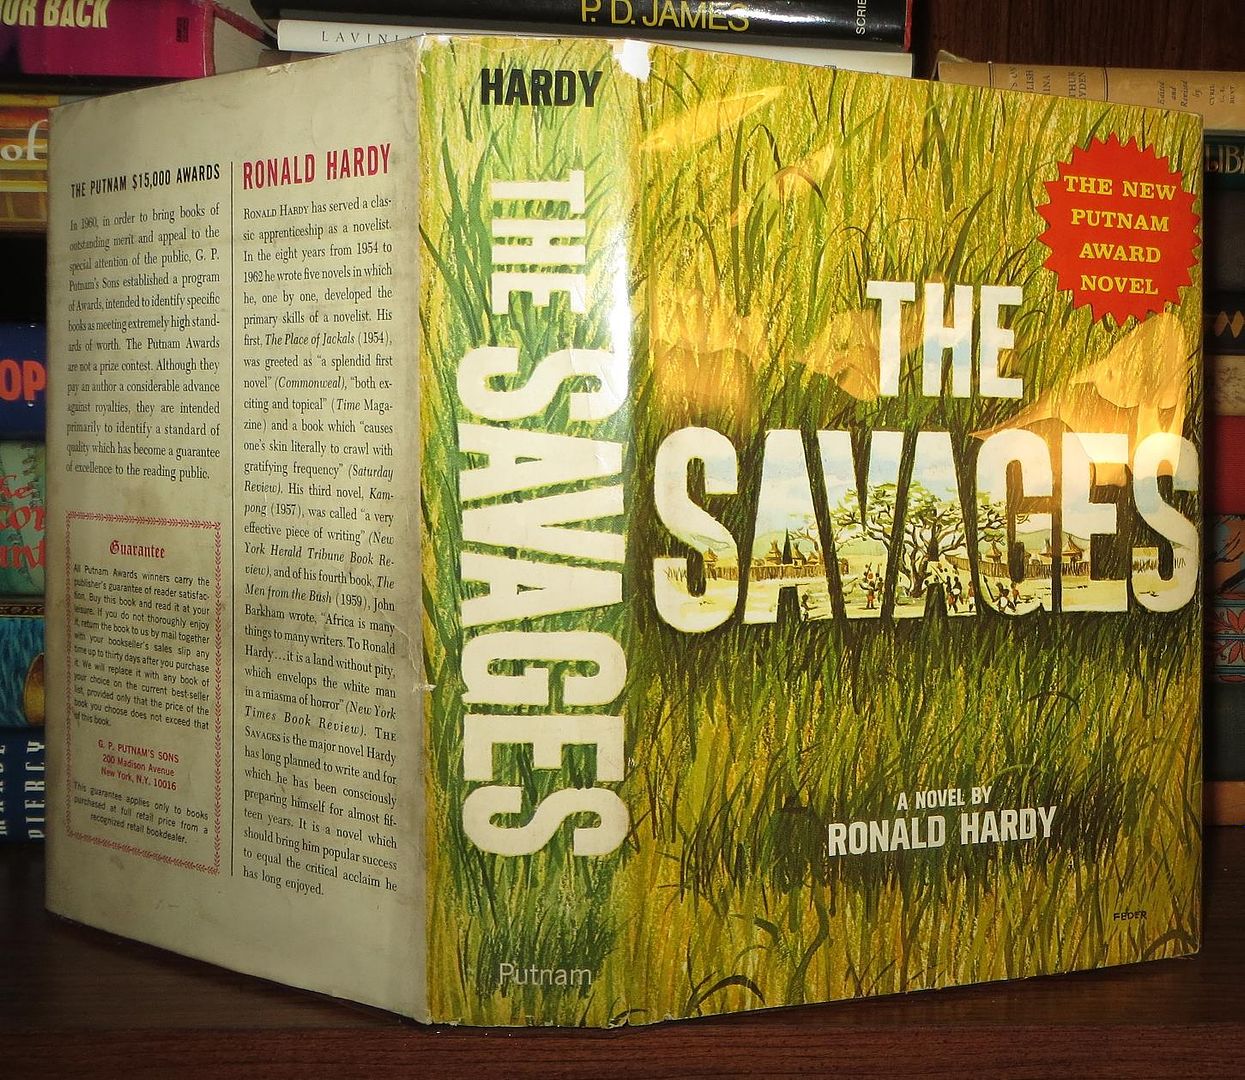 RONALD HARDY - The Savages